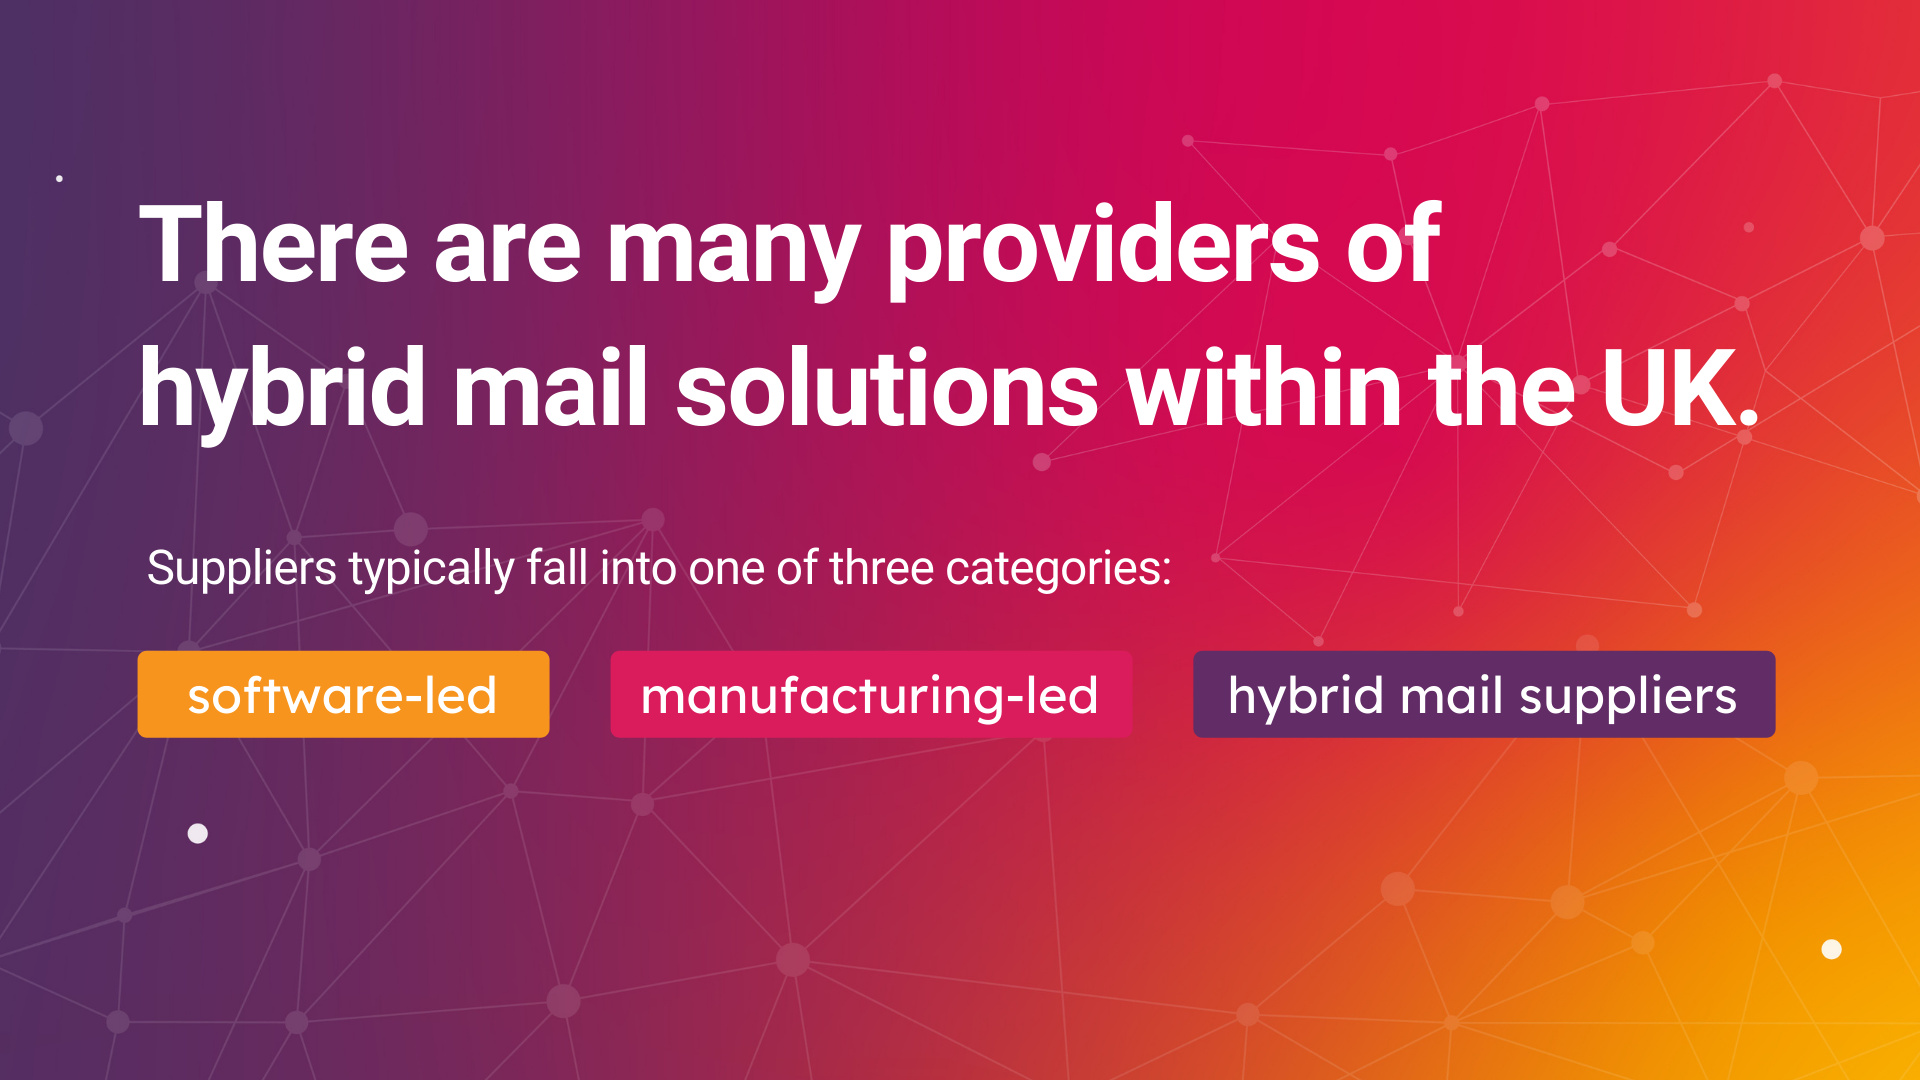 hybrid mail suppliers